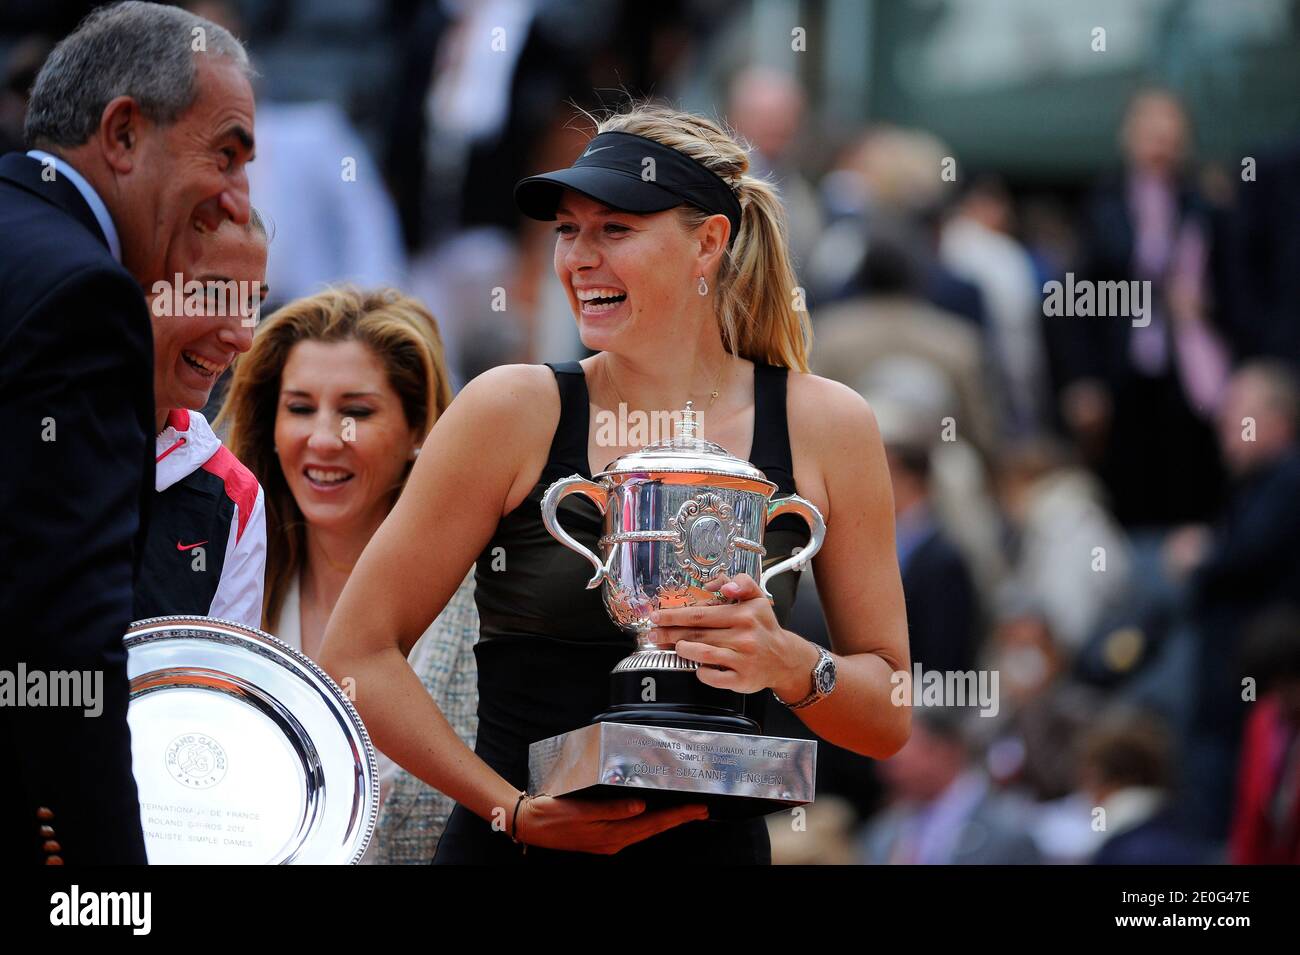 Russia's Maria Sharapova and Italy's Sara Errani hold their trophies recieved from former tennis Monica Seles and Jean Gachassin on the podium after their Women's Singles final tennis of the